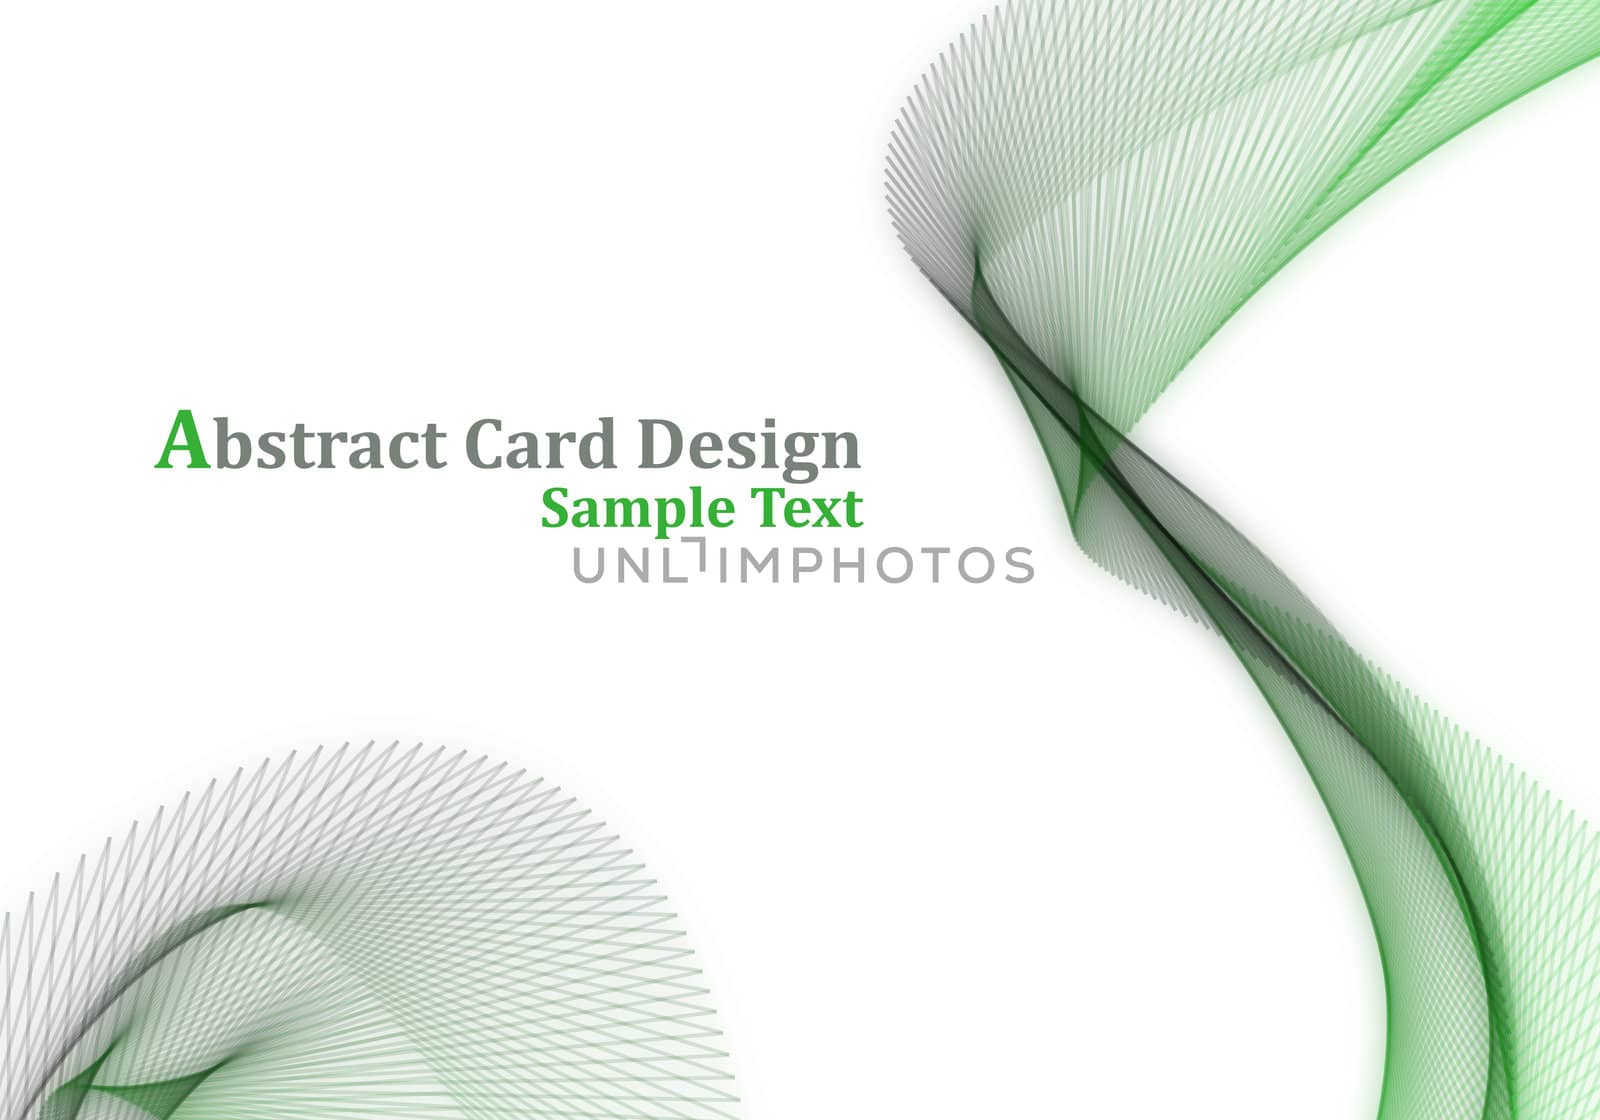 Abstract Card Design by Trusty